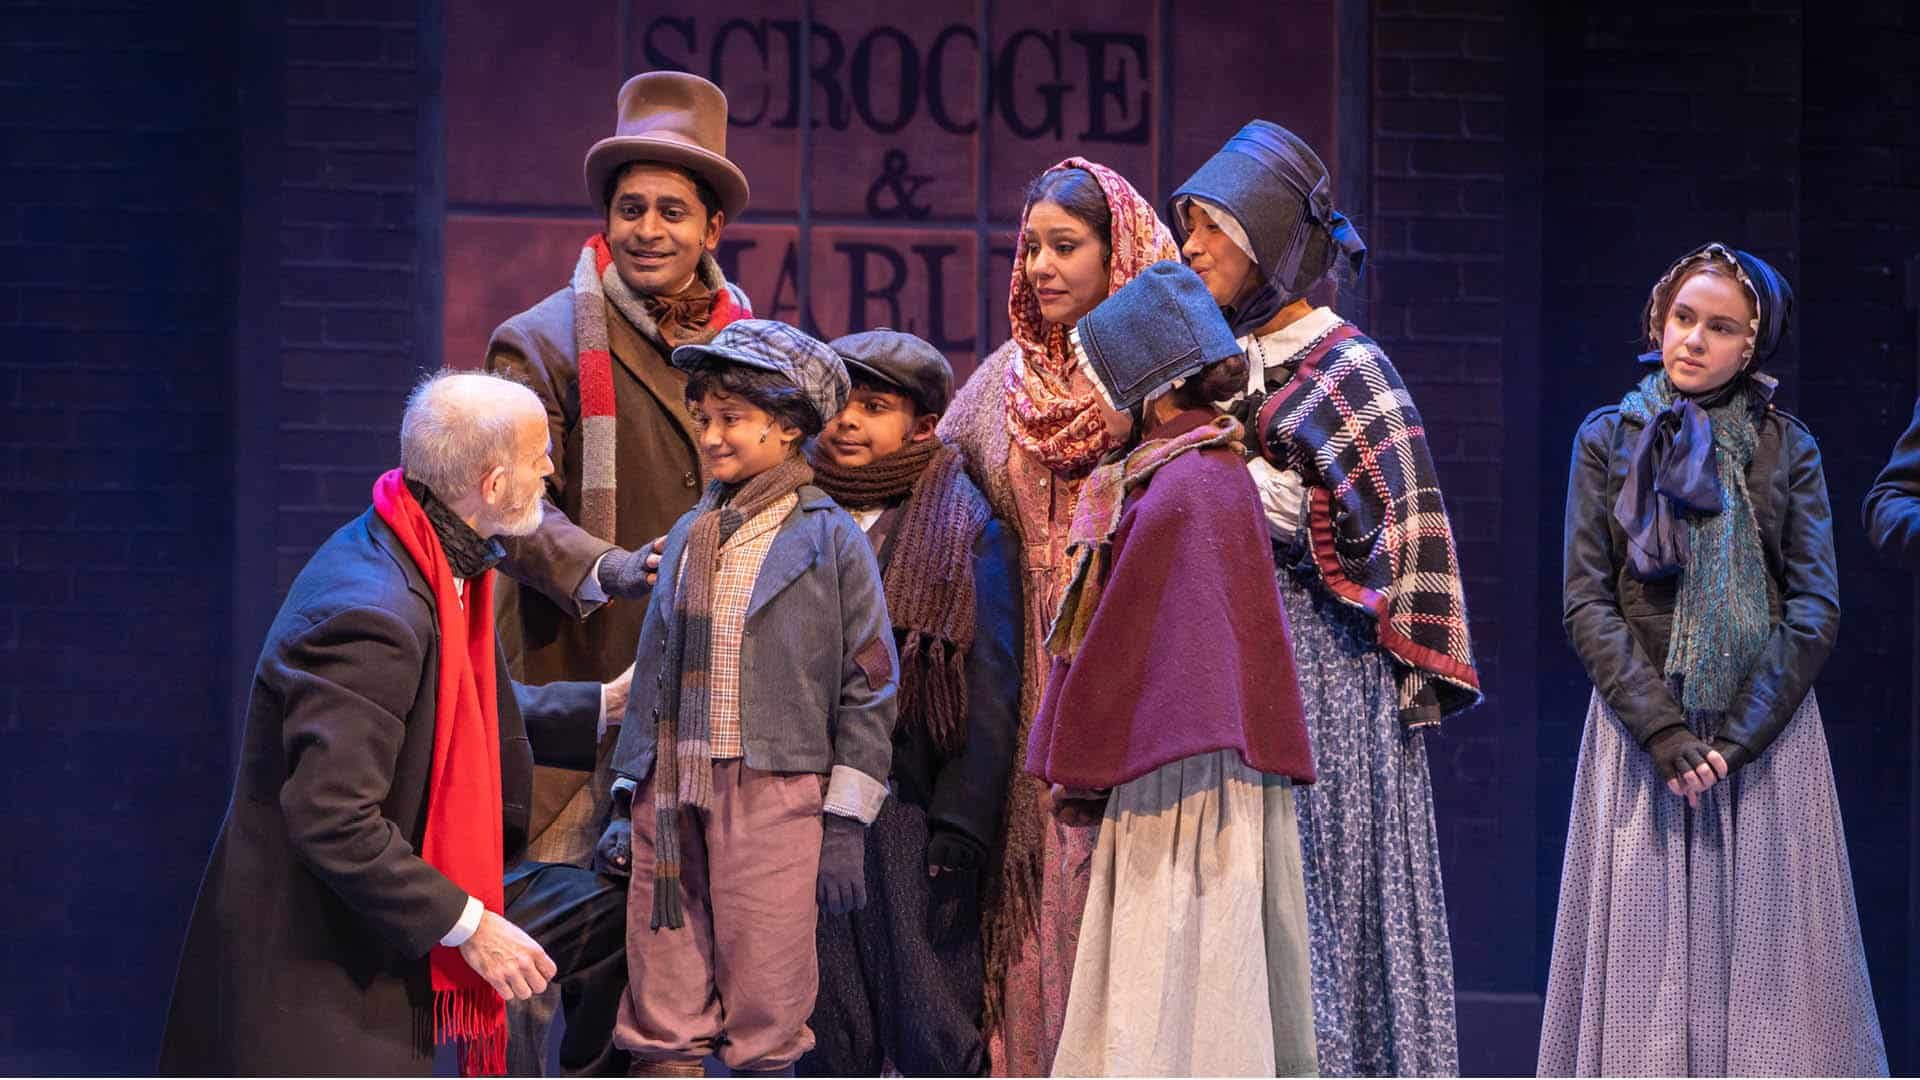 "A Christmas Carol" - Adaptation by Troy Siebels - Hanover Theatre for the Performing Arts (Worcester, MA.)